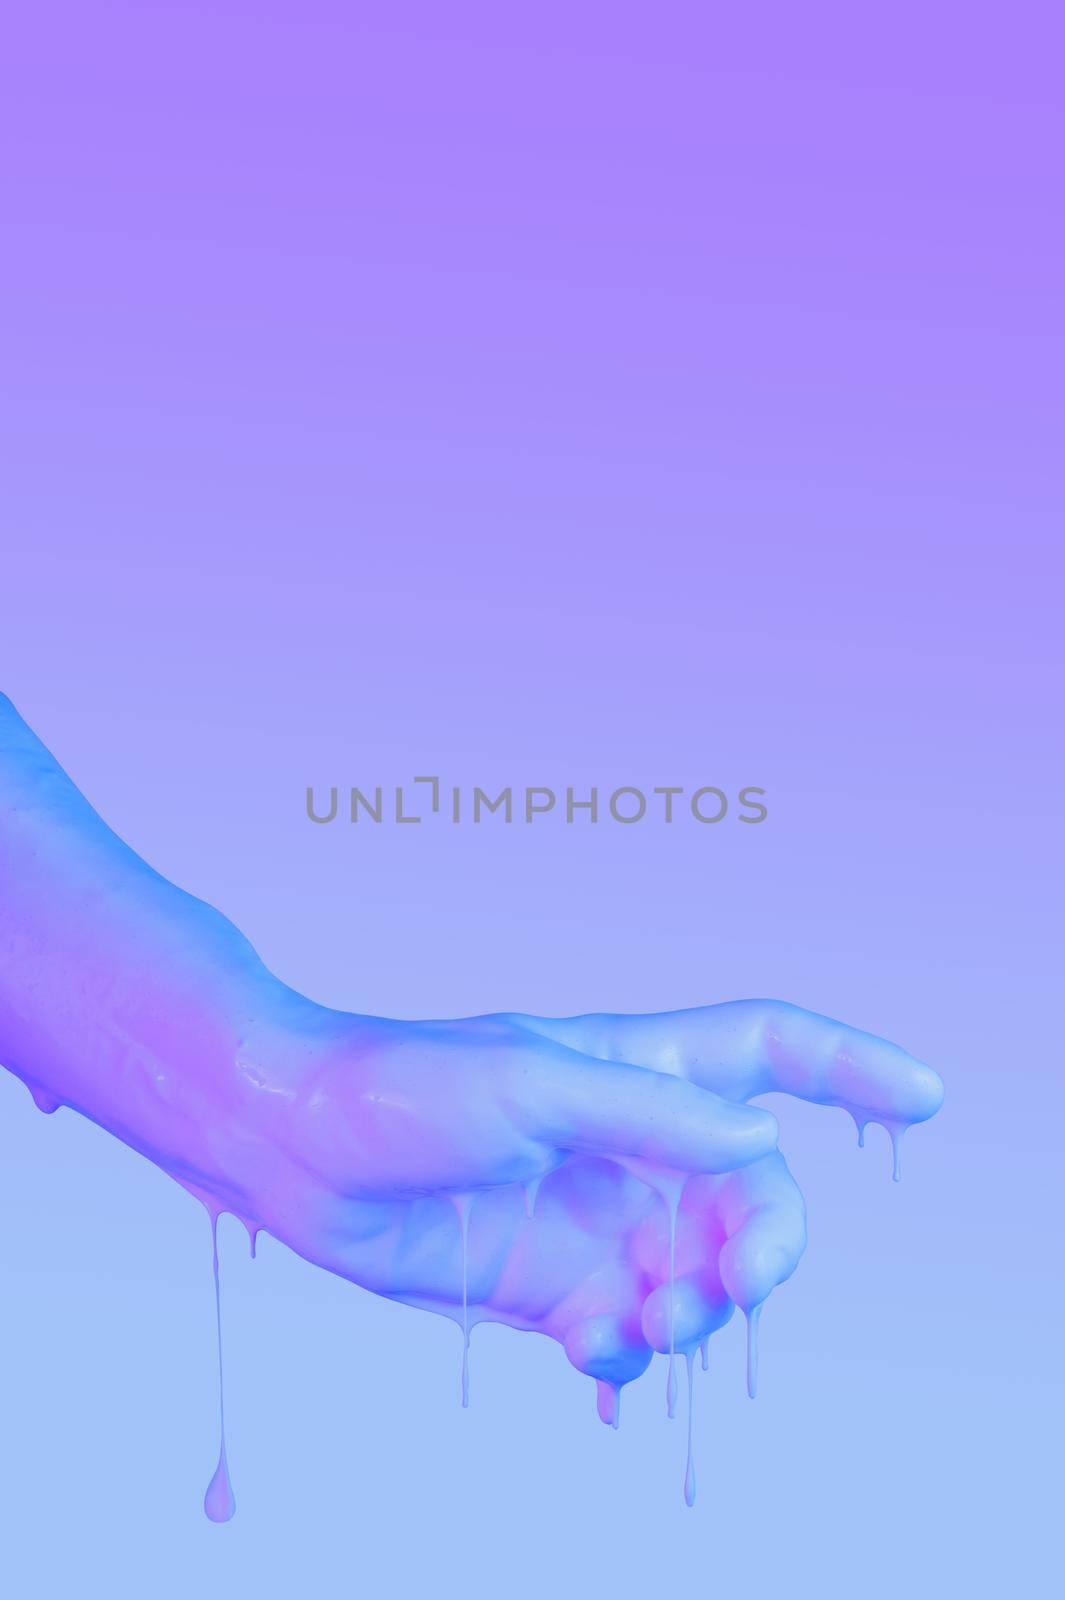 Human palms dipped in color paint. Painted hands. Liquid drips off fingers. Gesture. Contemporary art collage. Abstract surreal pop art style. Modern concept image. Zine culture. Funky minimalism. by bashta